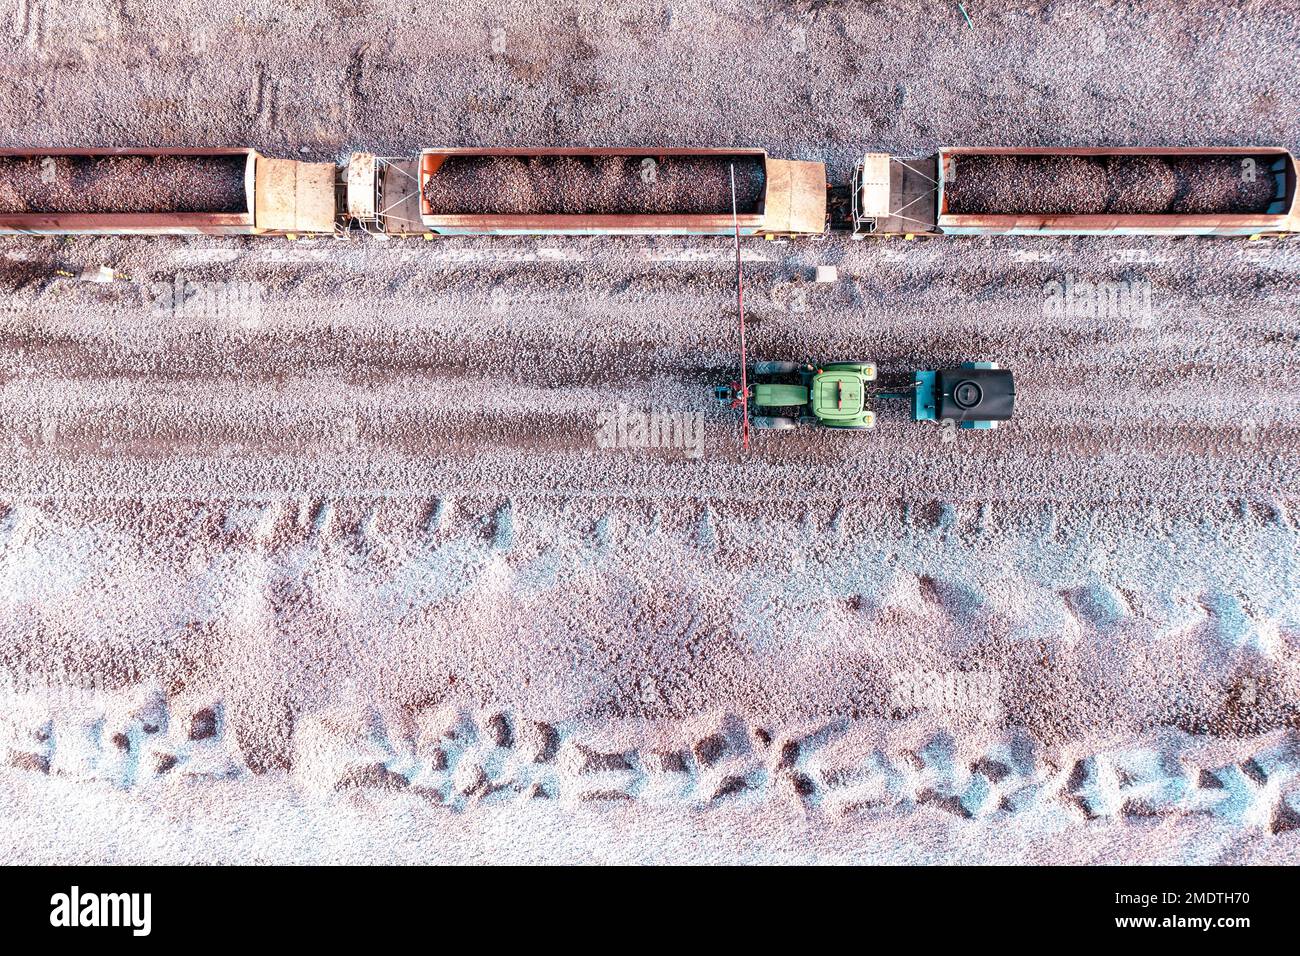 Aerial view directly above a mineral ore quarry with loaded railway wagons and a tractor with water bowser spraying water to dampen down airborne dust Stock Photo